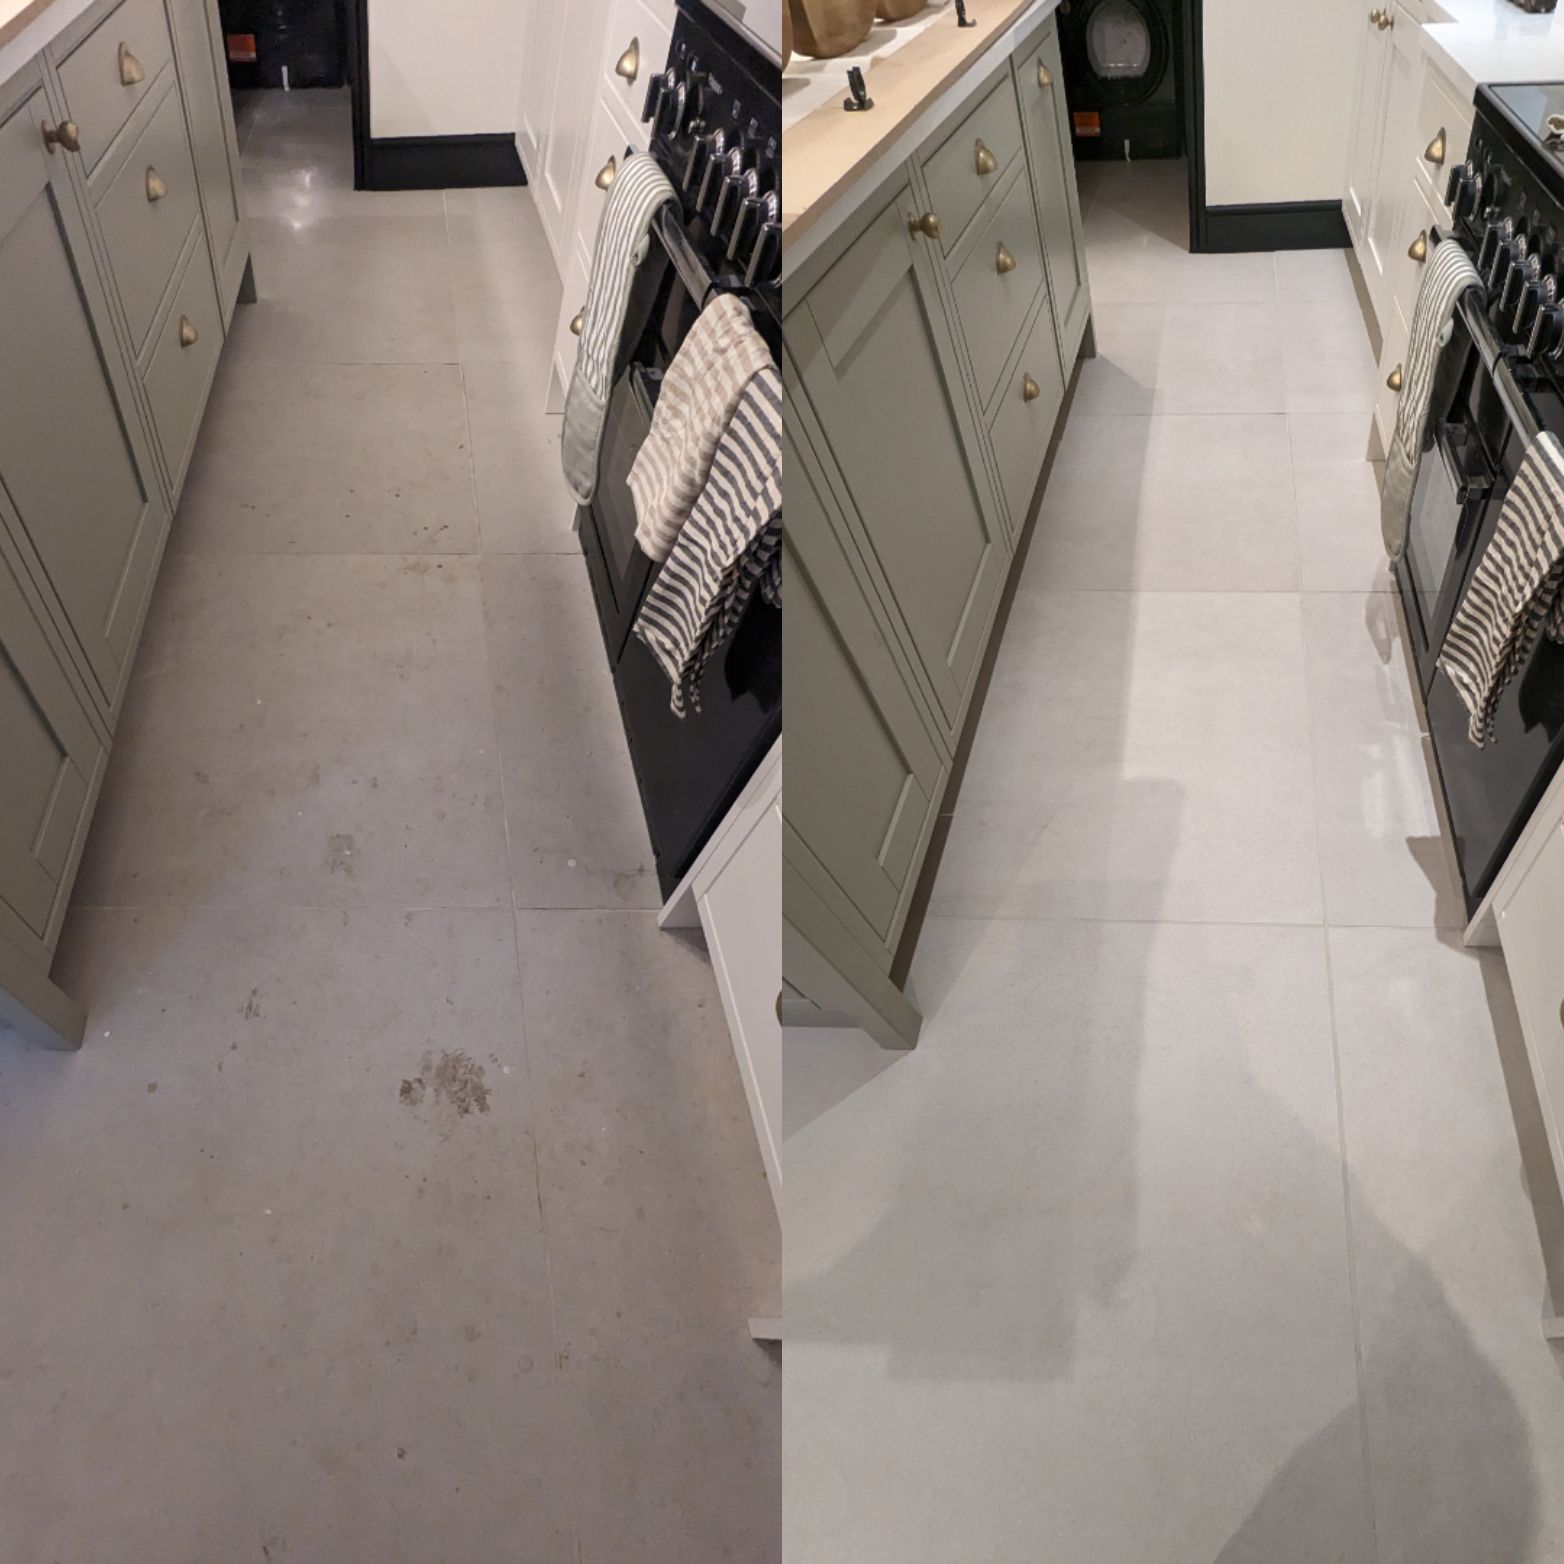 PORCELAIN TILES AND GROUT DEEP CLEANING AND SEALING IN WORSLEY, GREATER MANCHESTER